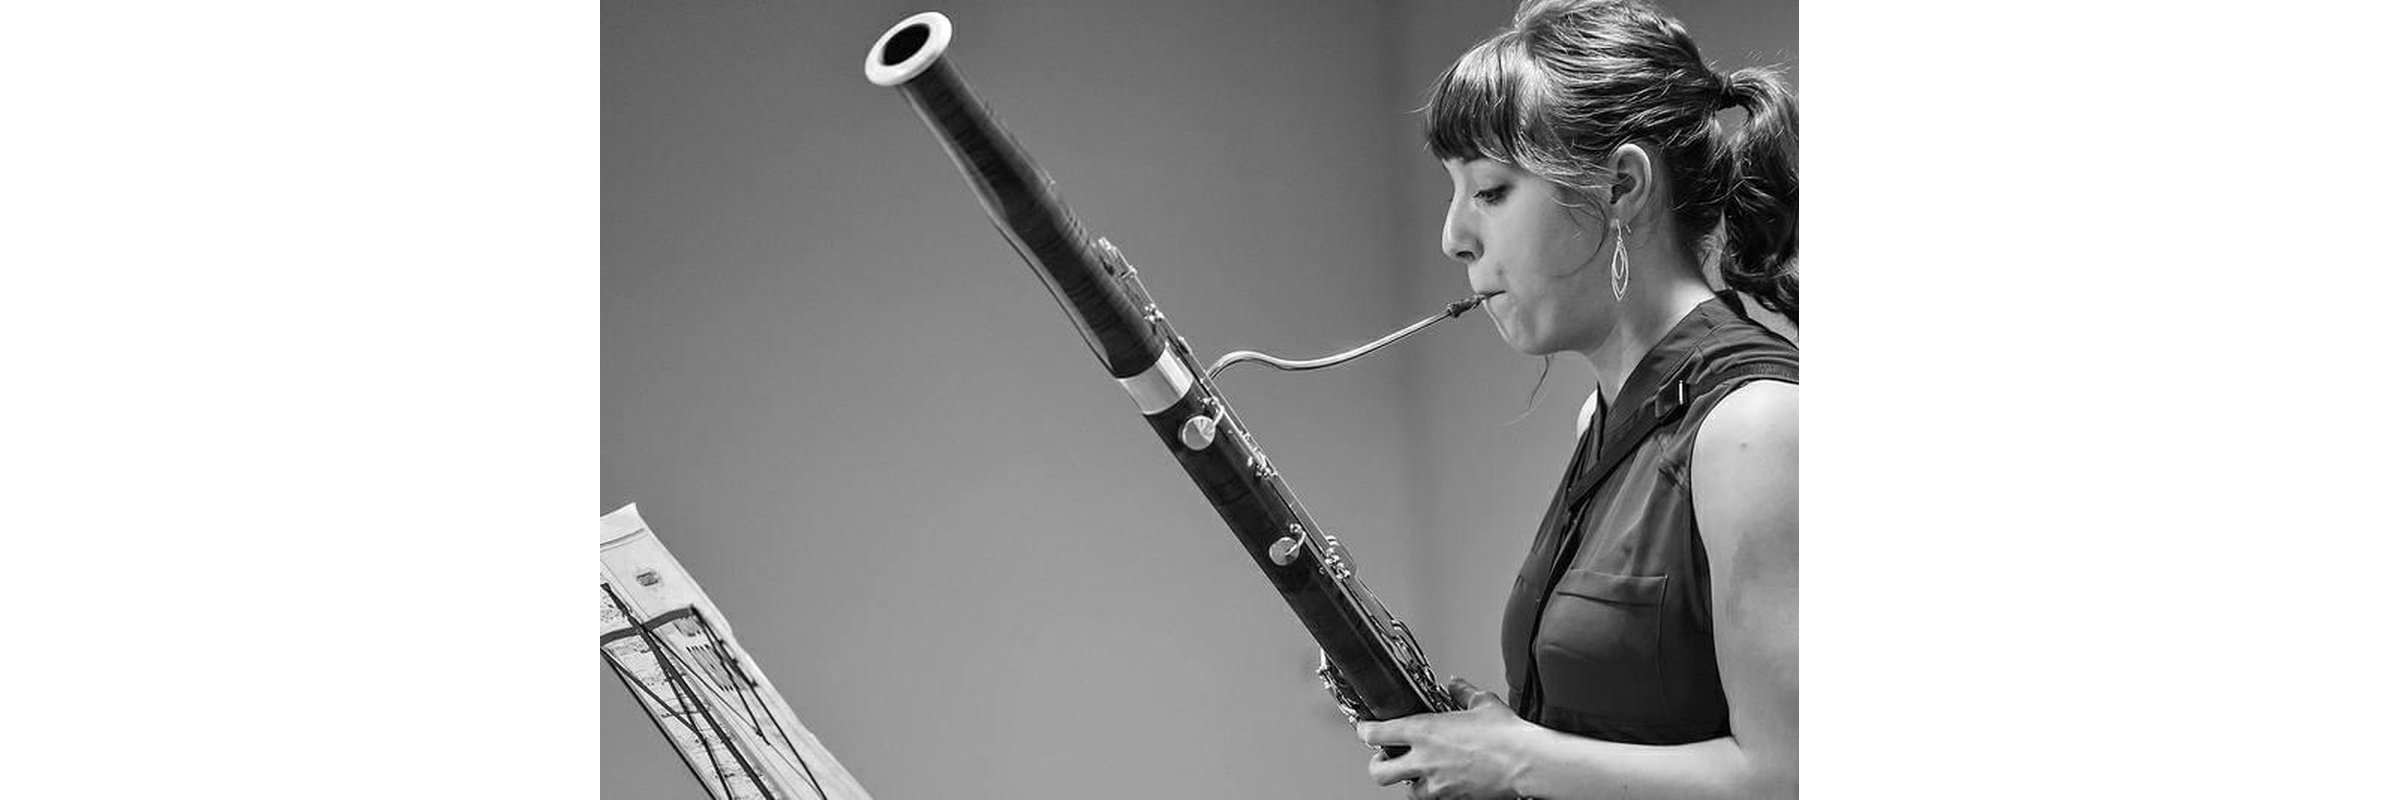 Kassandra Ormsby - Solo Bassoon house concert and Masterclass